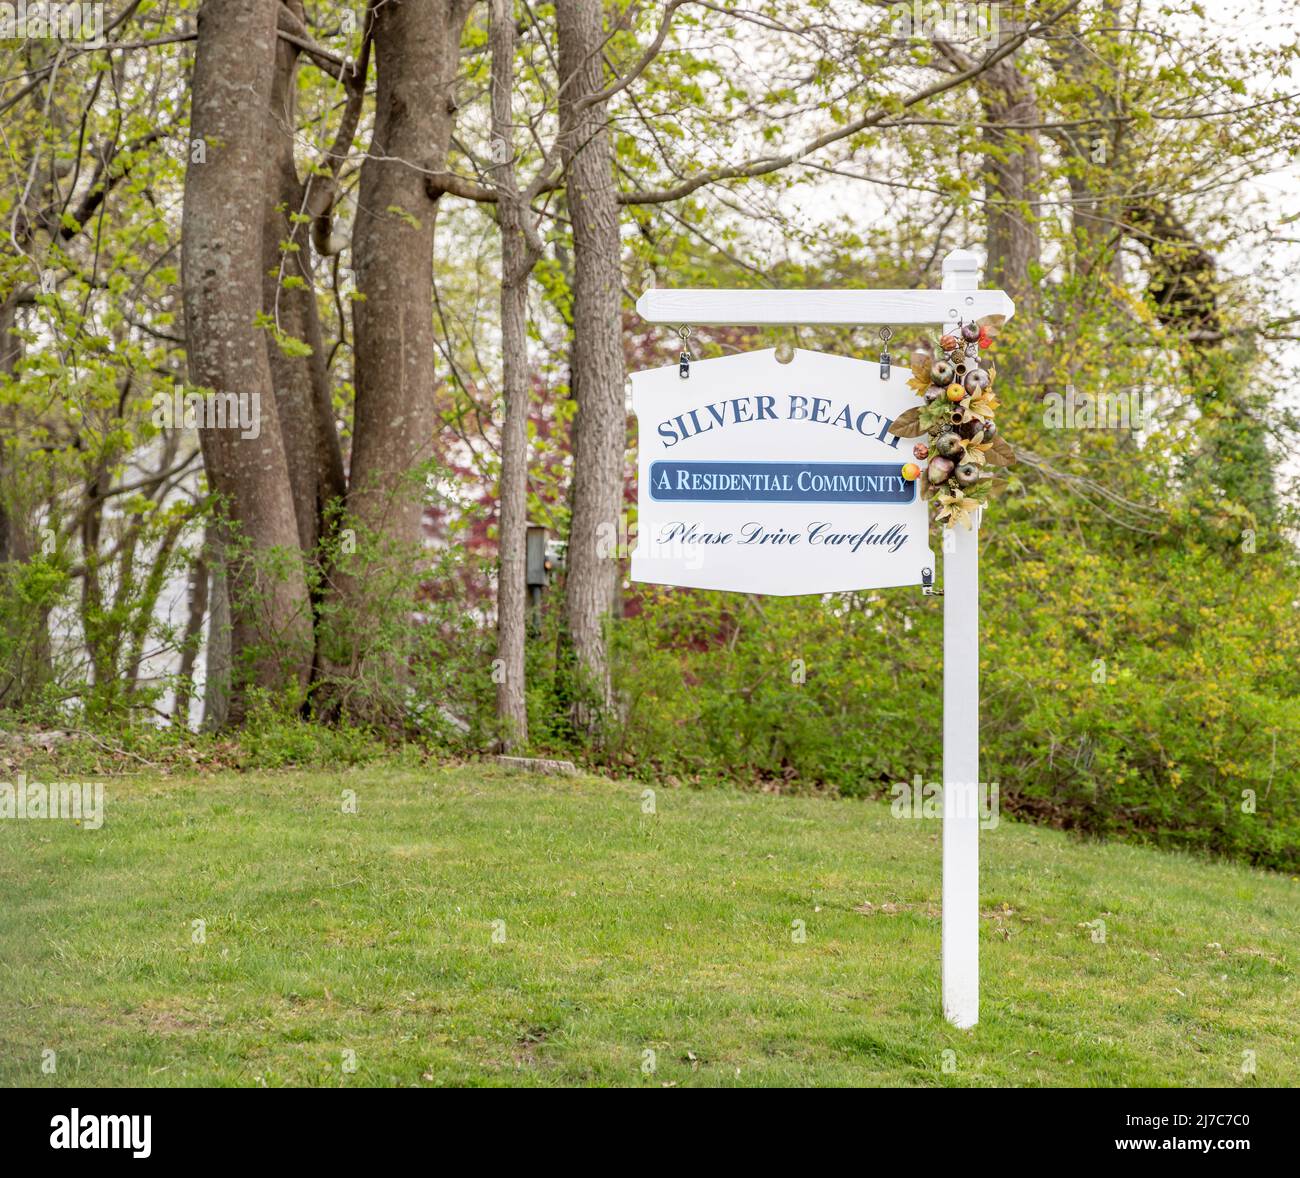 Sign for Silver Beach in Shelter Island, NY Stock Photo